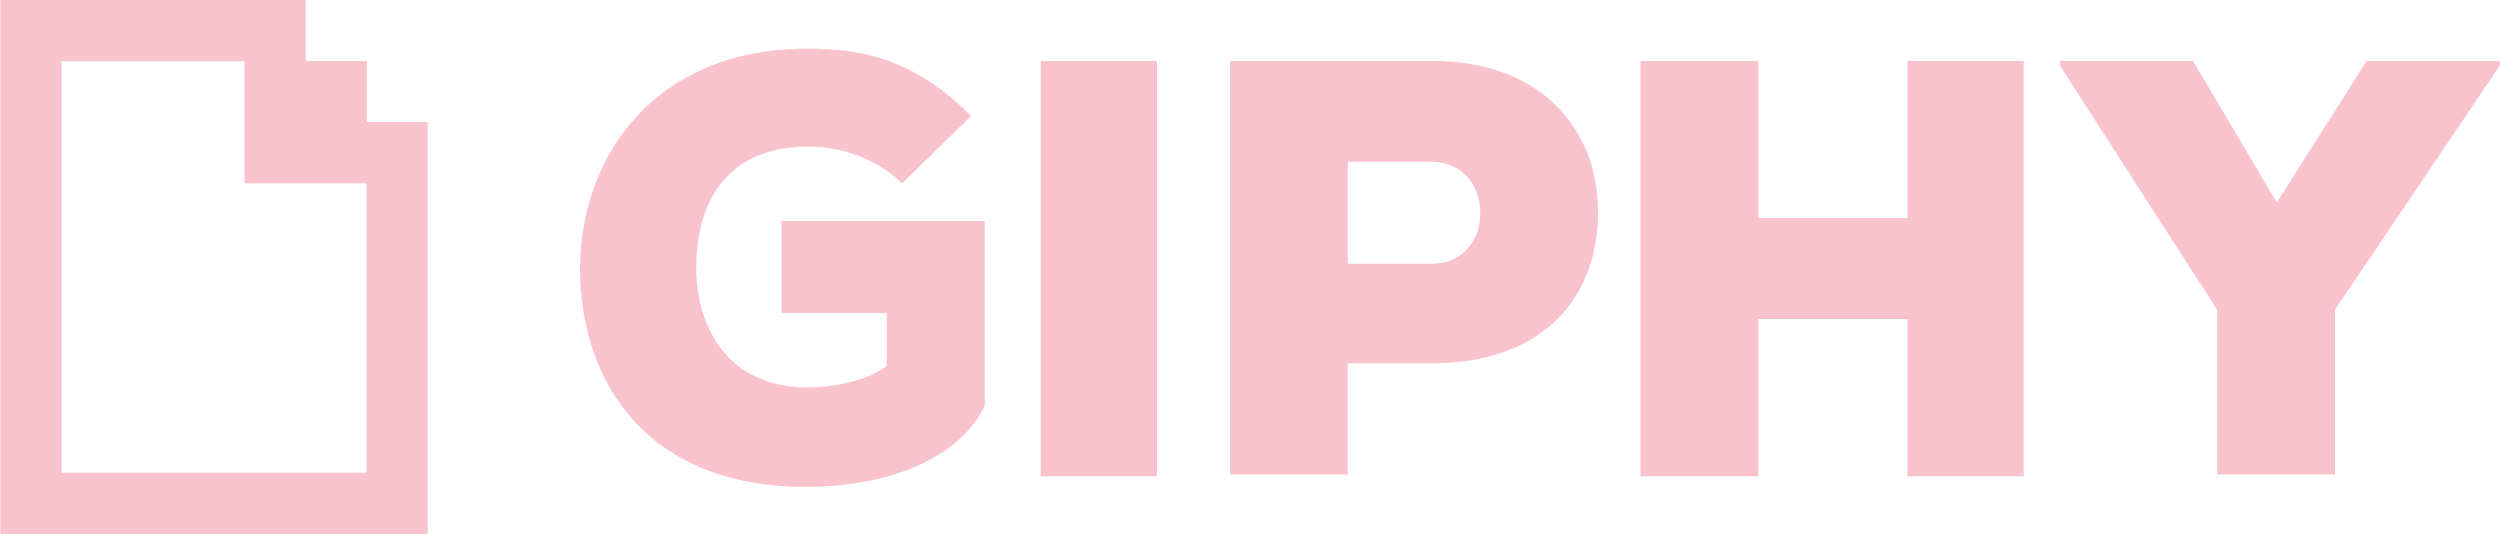 giphy-logo.png